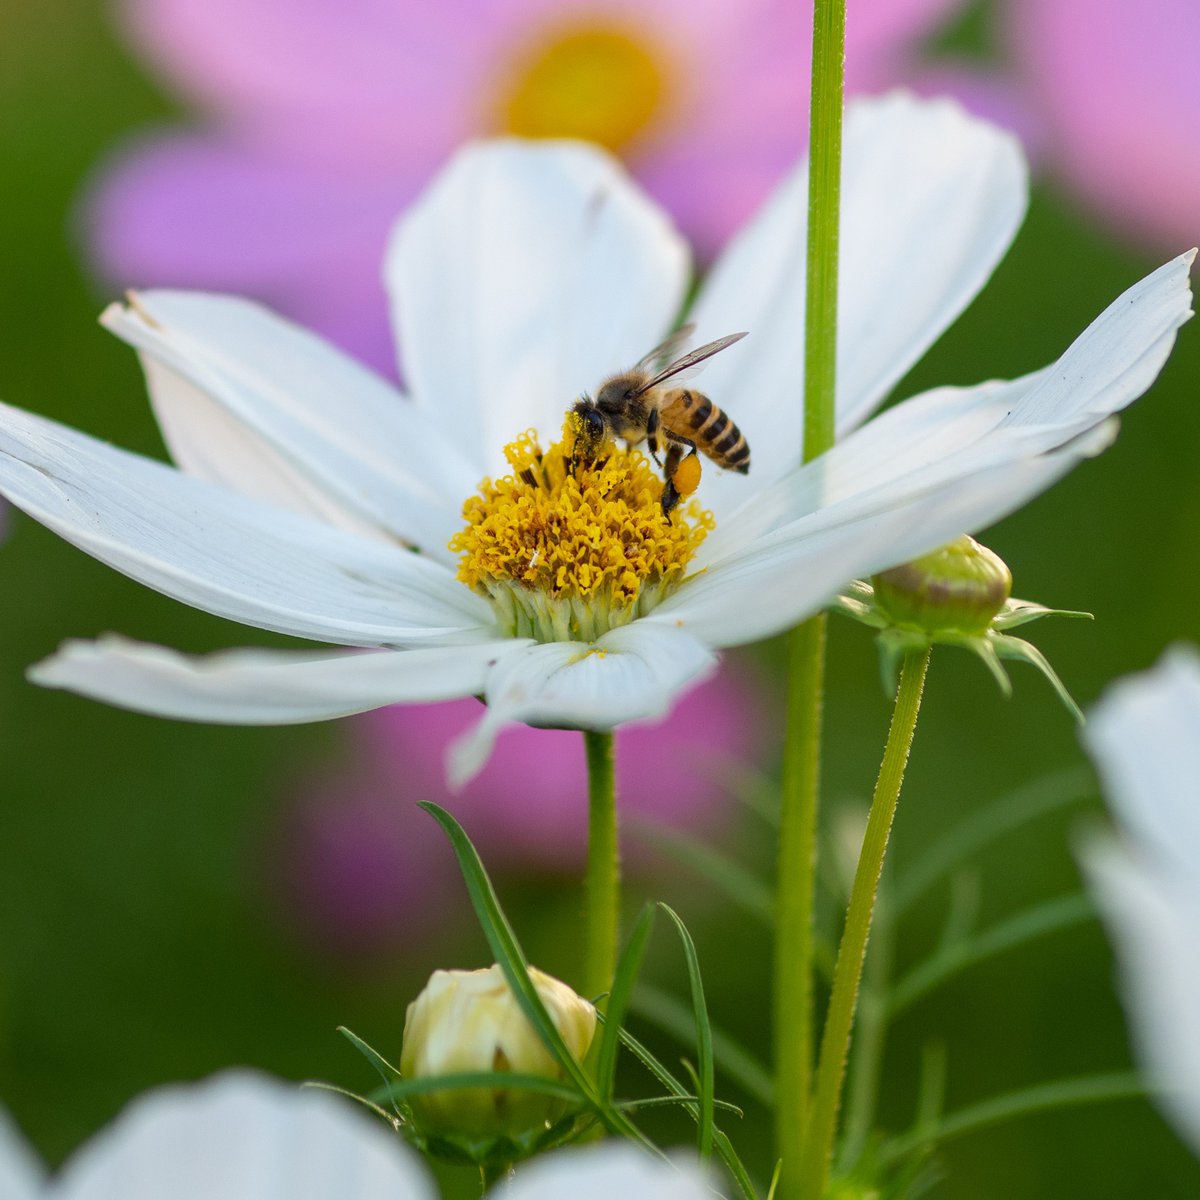 It's a bee-autiful day to celebrate #WorldBeeDay 🐝 Bees and other pollinators are fundamental for ensuring healthy ecosystems and food security. Take part in #NoMowMay and watch your garden come alive with the bees, butterflies, and more! 🌼🦋 #BeeFriendlyWales